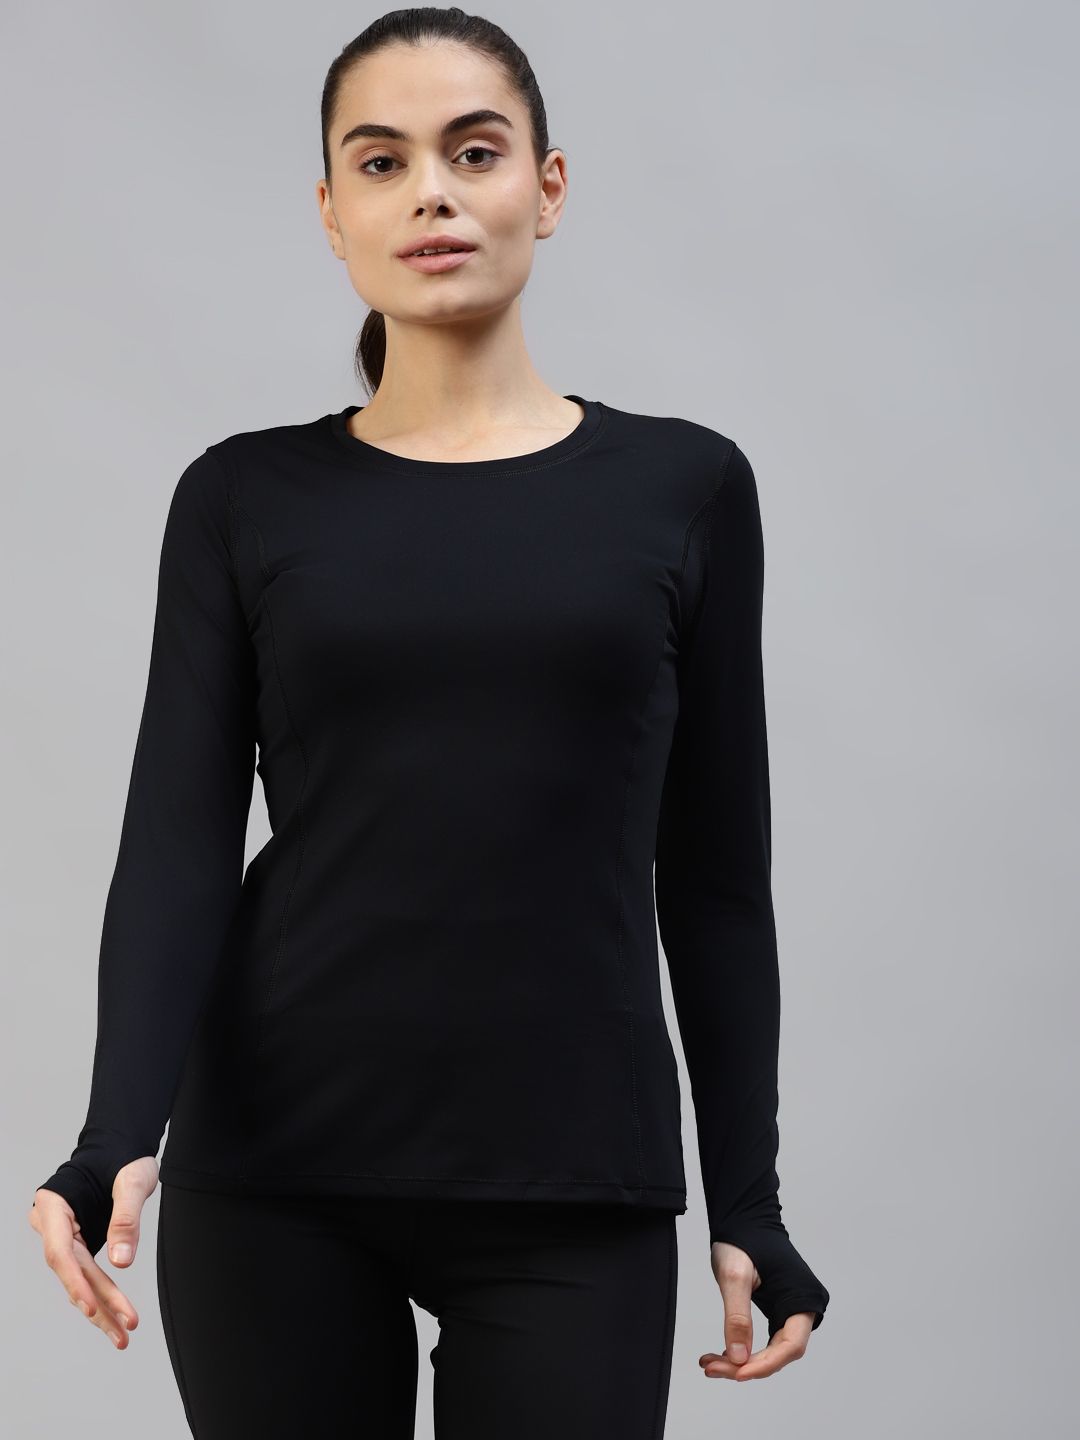 Marks & Spencer Women Black Solid Thumbhole T-shirt Price in India